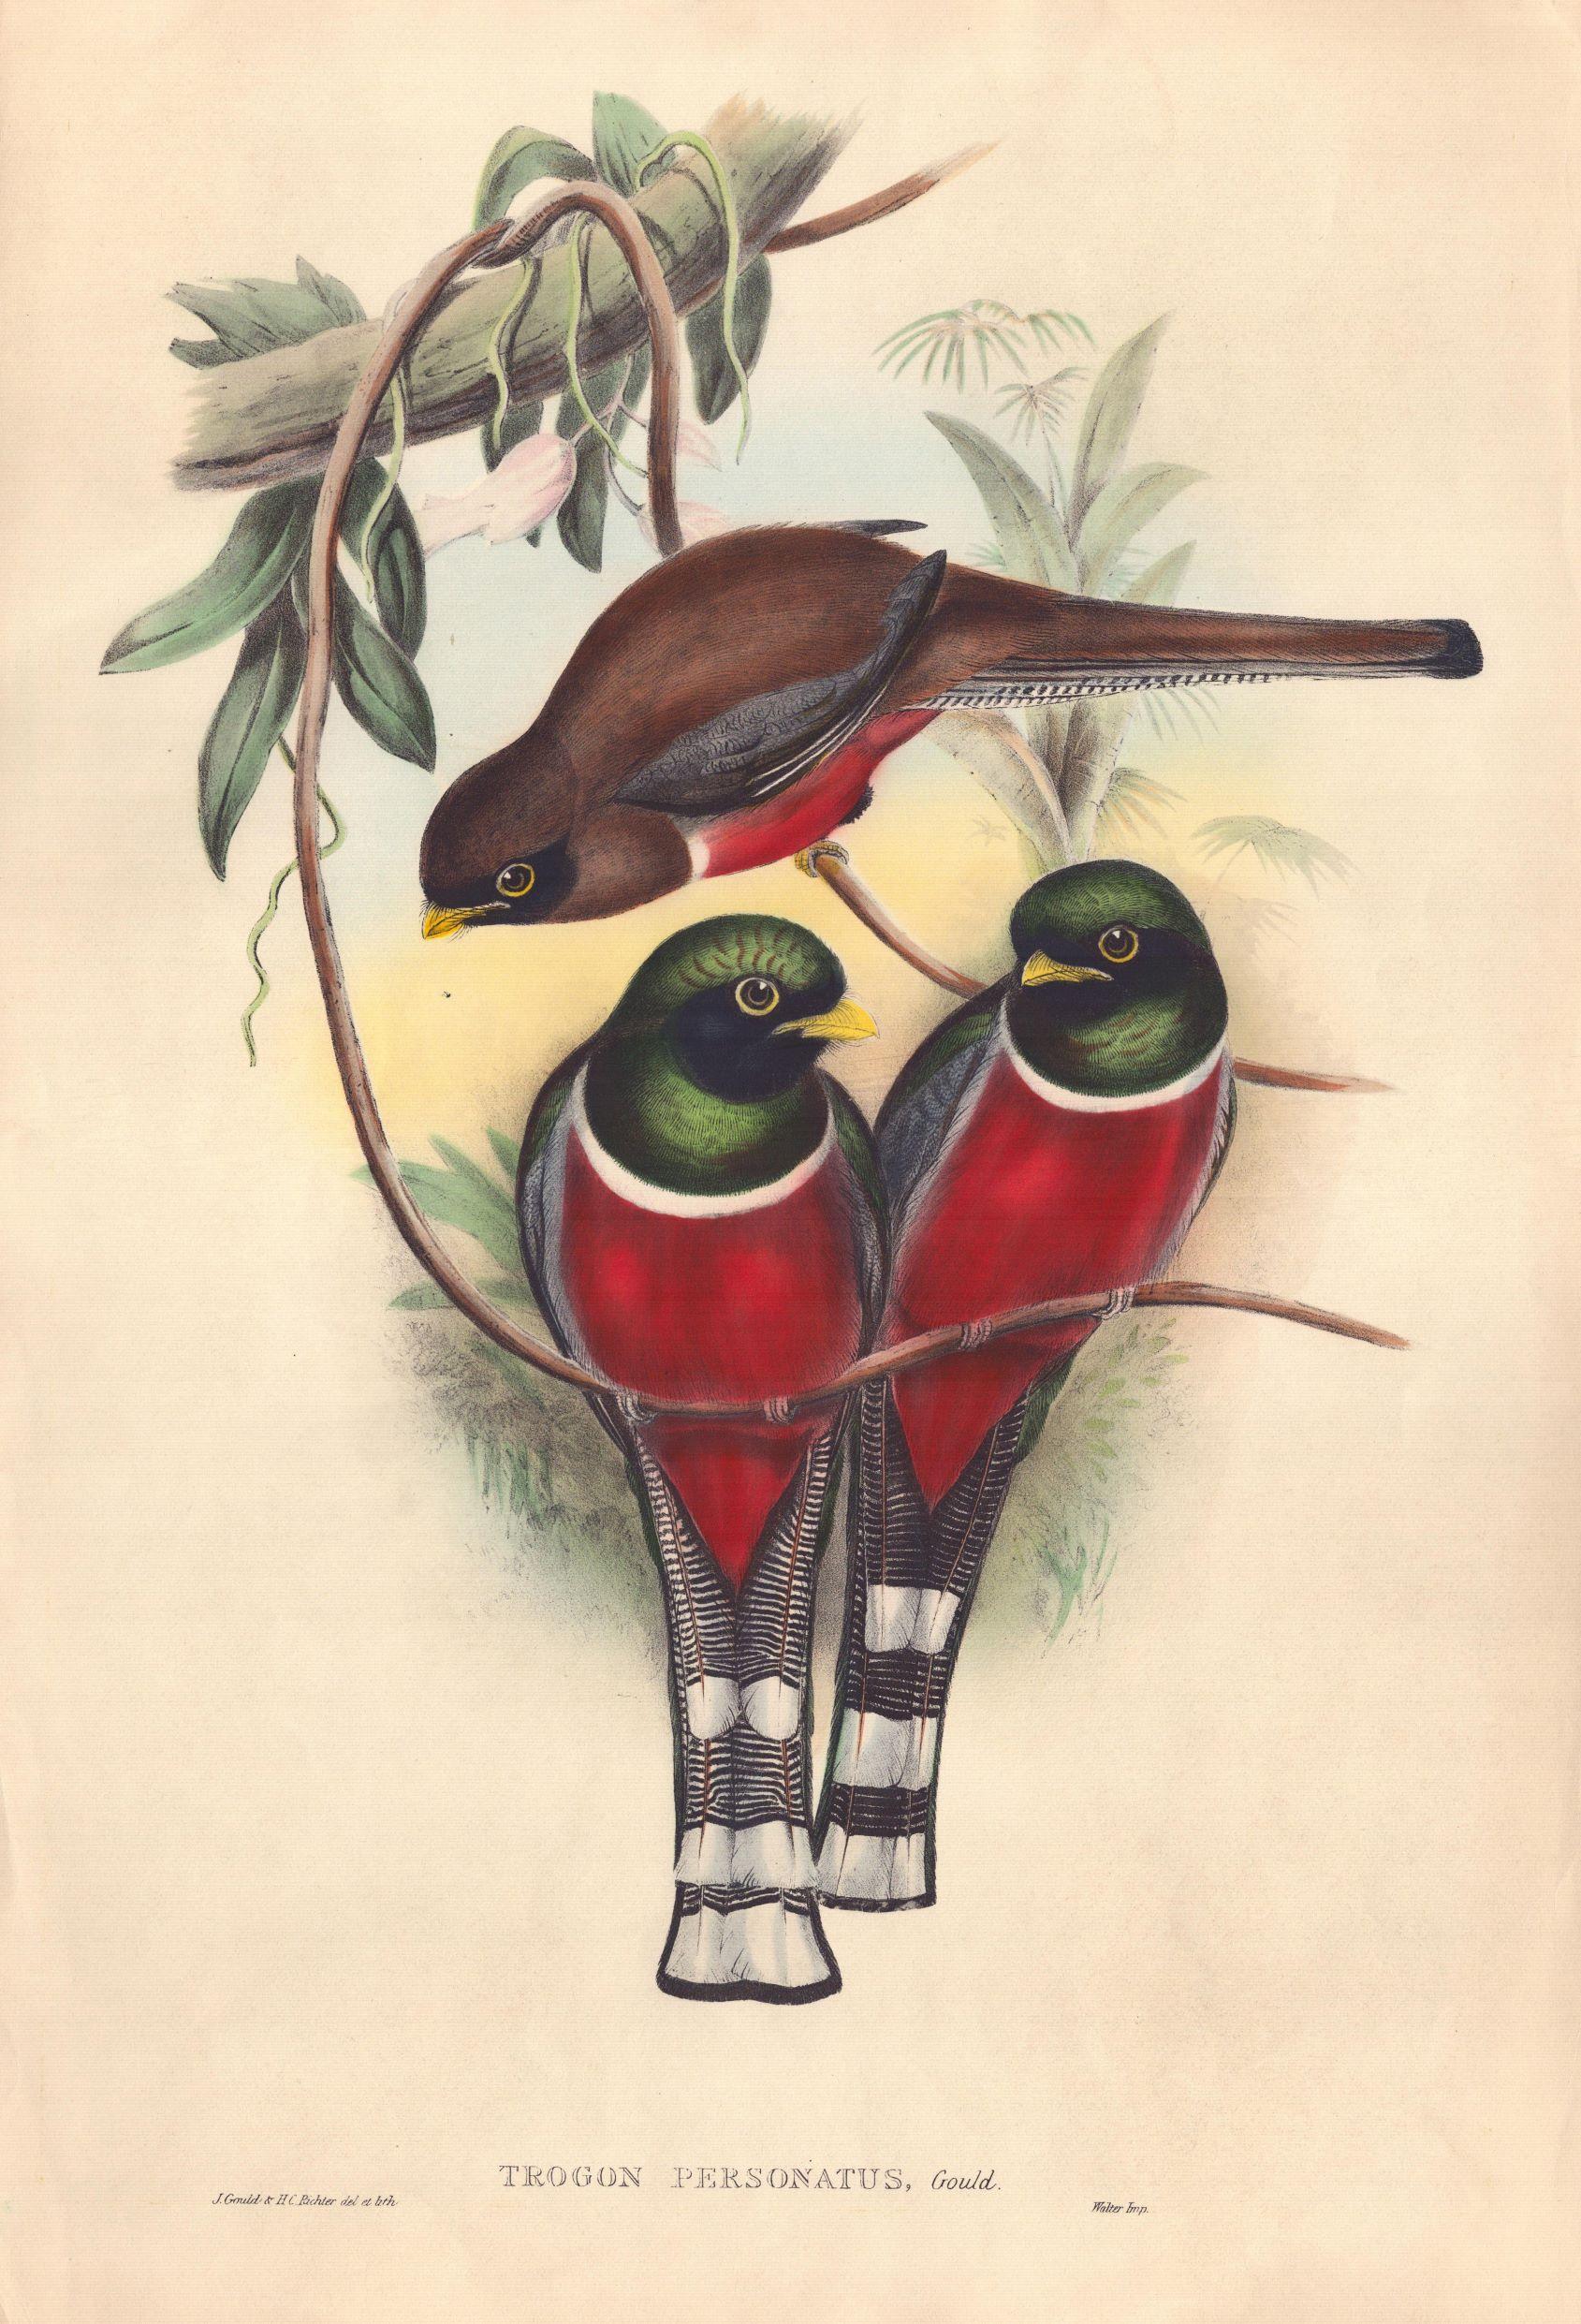 Trogon Personatus  - John Gould lithograph with hand-colored
size 54 cm X 36 cm
This remarkable ornithology lithograph with hand-finished color is from the esteemed John Gould’s 